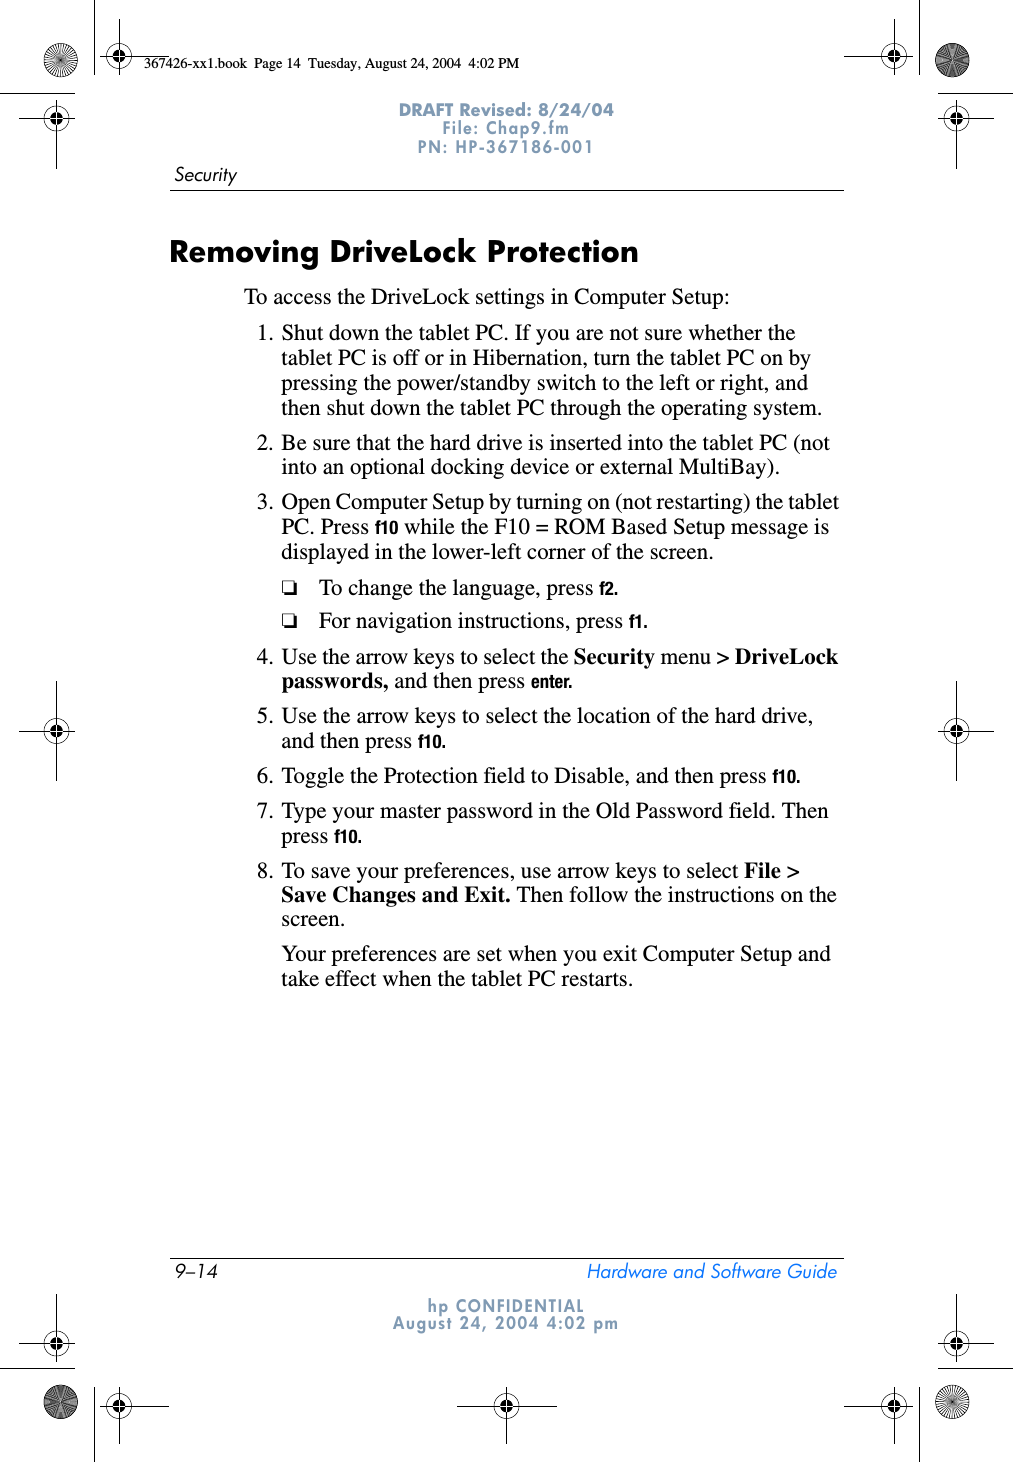 9–14 Hardware and Software GuideSecurityDRAFT Revised: 8/24/04File: Chap9.fm PN: HP-367186-001 hp CONFIDENTIALAugust 24, 2004 4:02 pmRemoving DriveLock ProtectionTo access the DriveLock settings in Computer Setup:1. Shut down the tablet PC. If you are not sure whether the tablet PC is off or in Hibernation, turn the tablet PC on by pressing the power/standby switch to the left or right, and then shut down the tablet PC through the operating system.2. Be sure that the hard drive is inserted into the tablet PC (not into an optional docking device or external MultiBay).3. Open Computer Setup by turning on (not restarting) the tablet PC. Press f10 while the F10 = ROM Based Setup message is displayed in the lower-left corner of the screen.❏To change the language, press f2.❏For navigation instructions, press f1.4. Use the arrow keys to select the Security menu &gt; DriveLock passwords, and then press enter.5. Use the arrow keys to select the location of the hard drive, and then press f10.6. Toggle the Protection field to Disable, and then press f10.7. Type your master password in the Old Password field. Then press f10.8. To save your preferences, use arrow keys to select File &gt; Save Changes and Exit. Then follow the instructions on the screen.Your preferences are set when you exit Computer Setup and take effect when the tablet PC restarts.367426-xx1.book  Page 14  Tuesday, August 24, 2004  4:02 PM